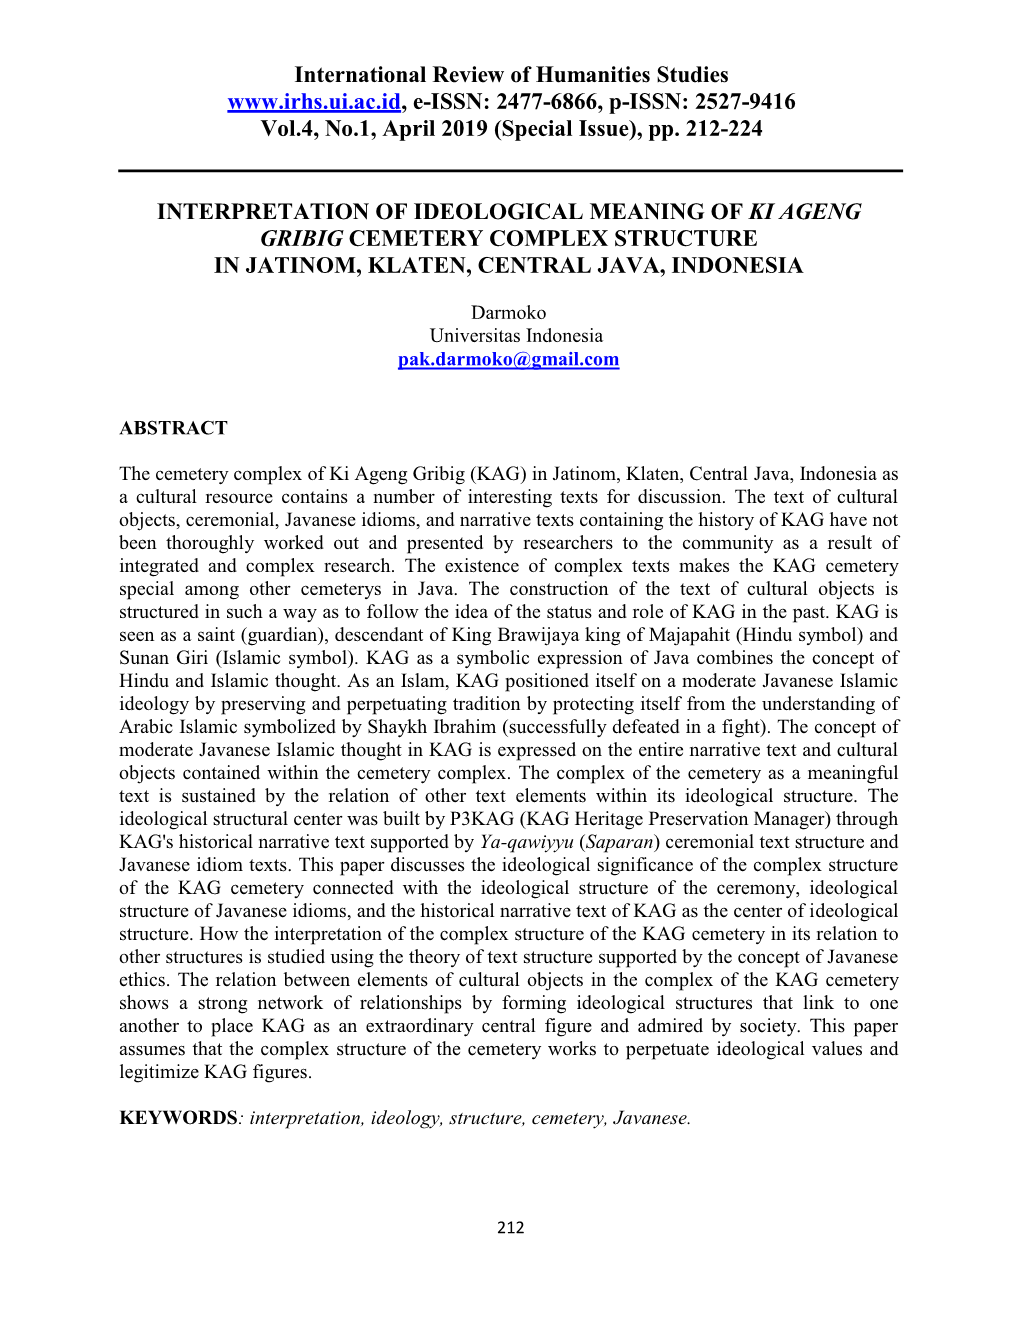 2477-6866, P-ISSN: 2527-9416 Vol.4, No.1, April 2019 (Special Issue), Pp